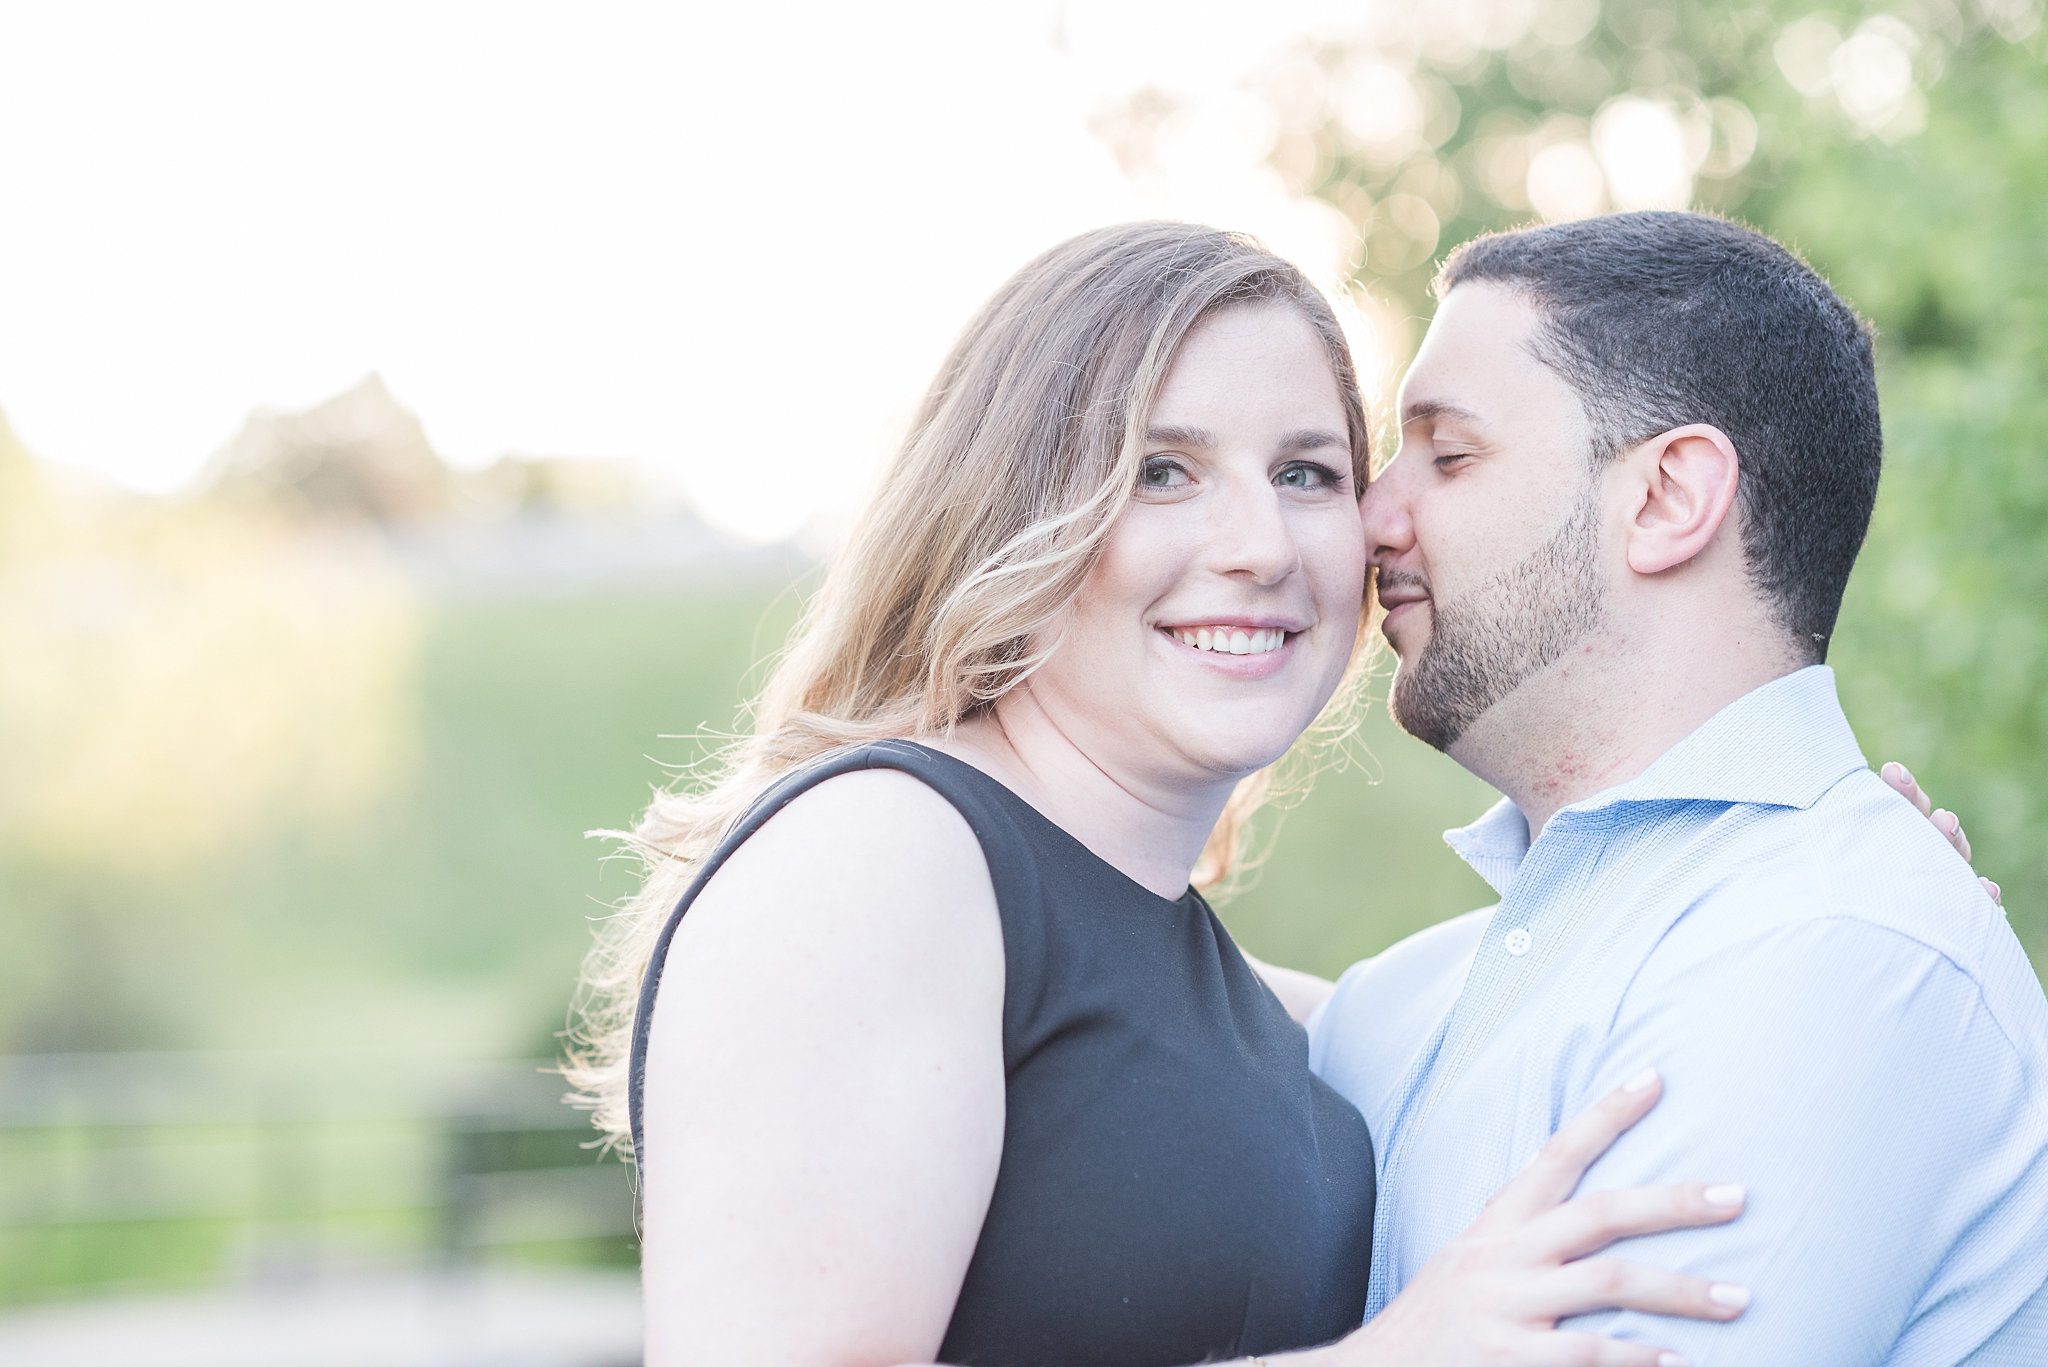 Spring Experimental Farm Engagement | Ottawa Engagement | Engagement photos at Dominion Arboretum at the Central Experimental Farm Get more inspiration from this fun springtime engagement session. #ottawawedding #weddingphotography #ottawaweddings